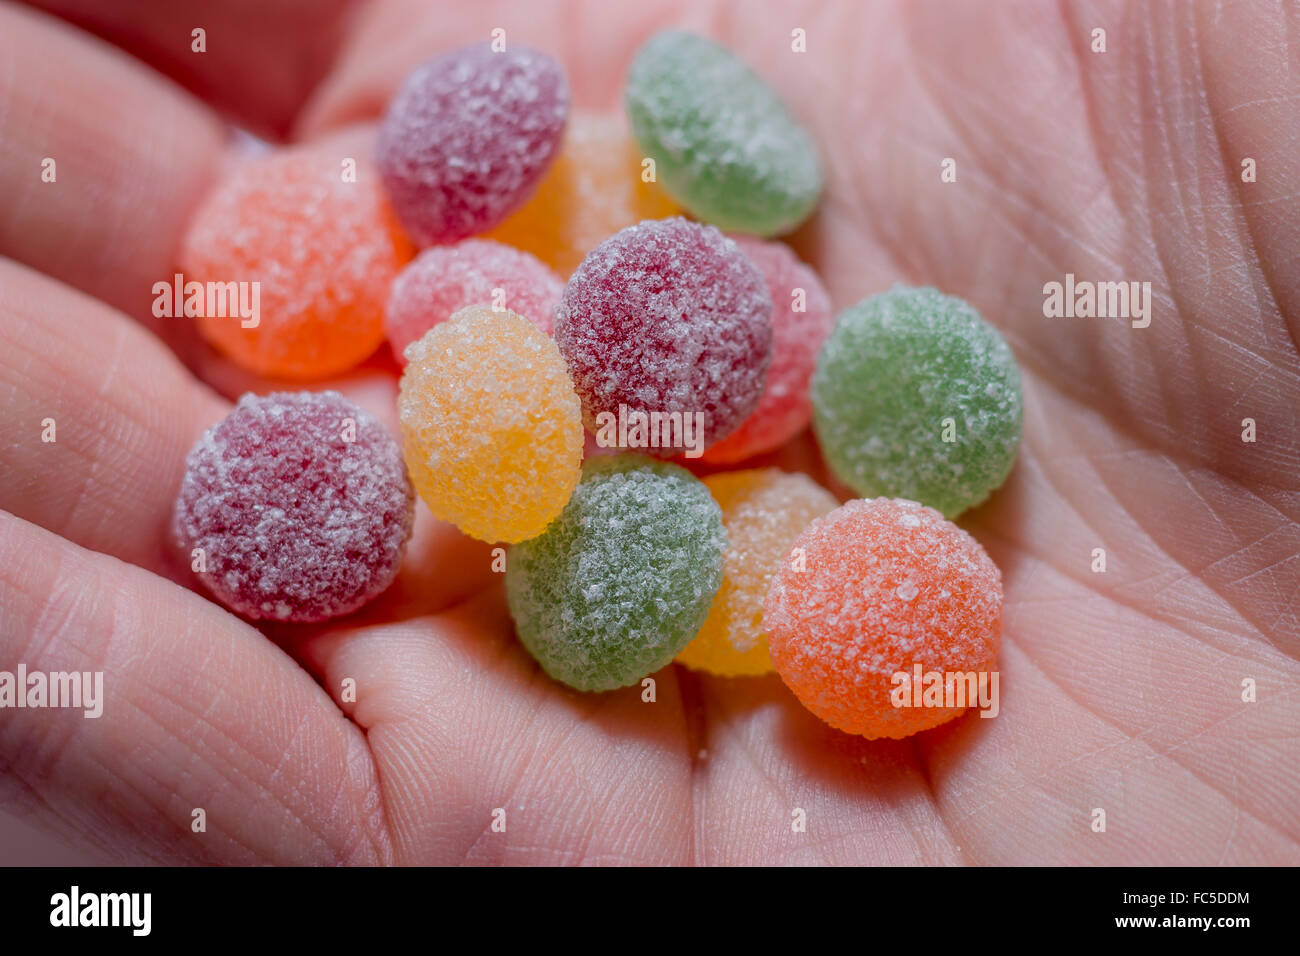 A serving (13 sweets) of jelly-tots held in the palm of a hand. Stock Photo